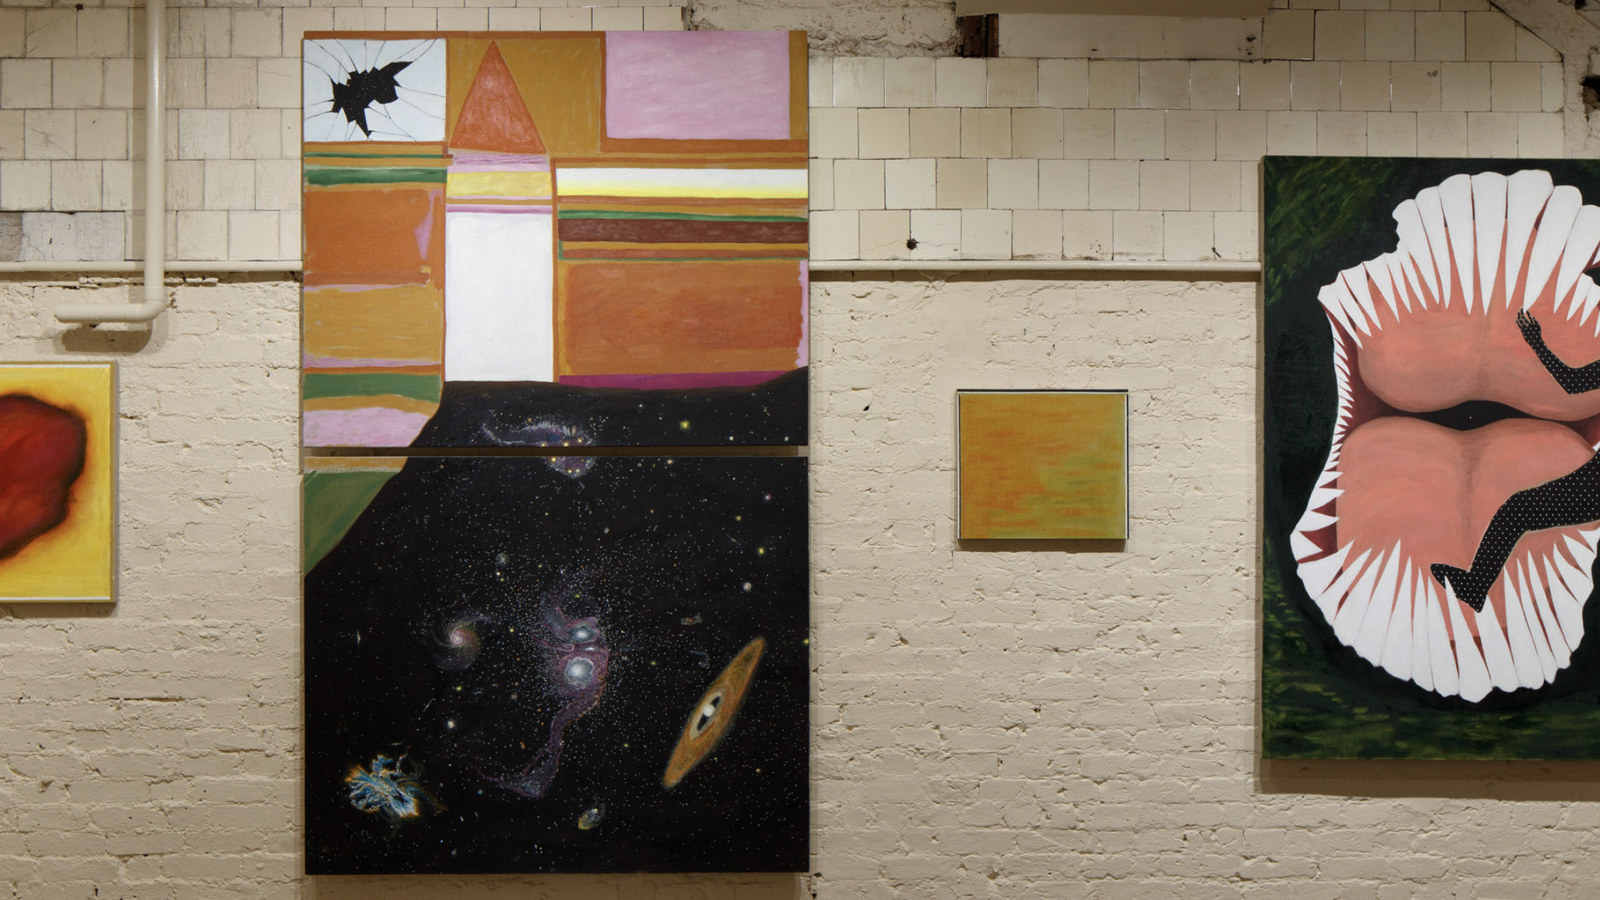 From left to right: Leidy Churchman, The Between is Ringing (Great Wound), 2020. Oil on linen, 71.5 x 86.5 cm.Leidy Churchman, The Between is Ringing (Diptych), 2020.Leidy Churchman, The Between is Ringing (Stare), 2020. Oil on linen, 44.6 x 51 cm.Leidy Churchman, The Between is Ringing (Milurepa&#x27;s Biggest), 2020. Oil on linen, 177.8 x 142.5 cm.Leidy Churchman: The Between is Ringing, installation view, 12 April – 6 June 2021 at RODEO Gallery, Bourbon Street.Courtesy of the Artist and RODEO.